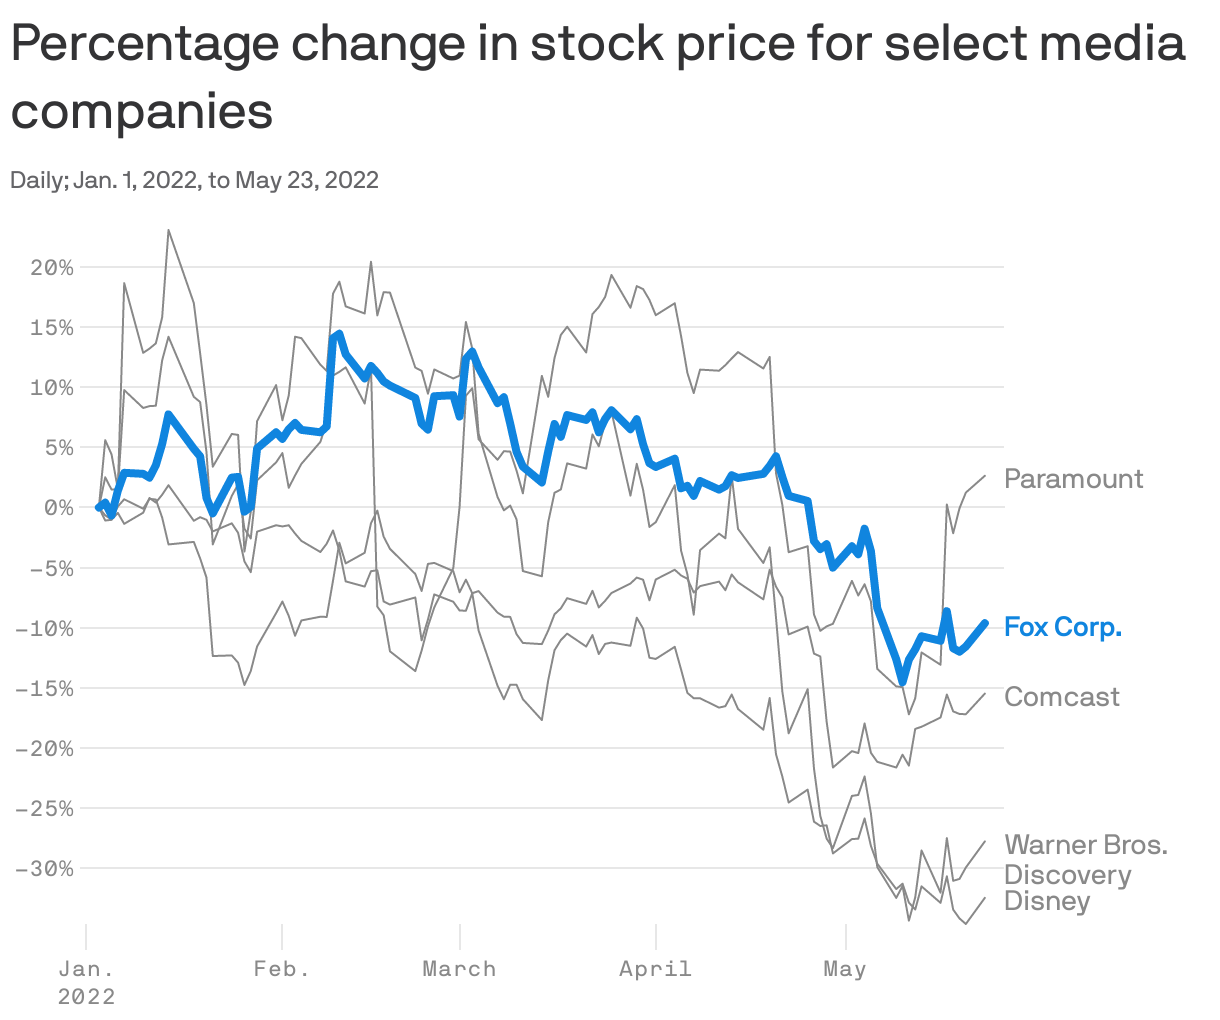 Percentage change in stock price for select media companies